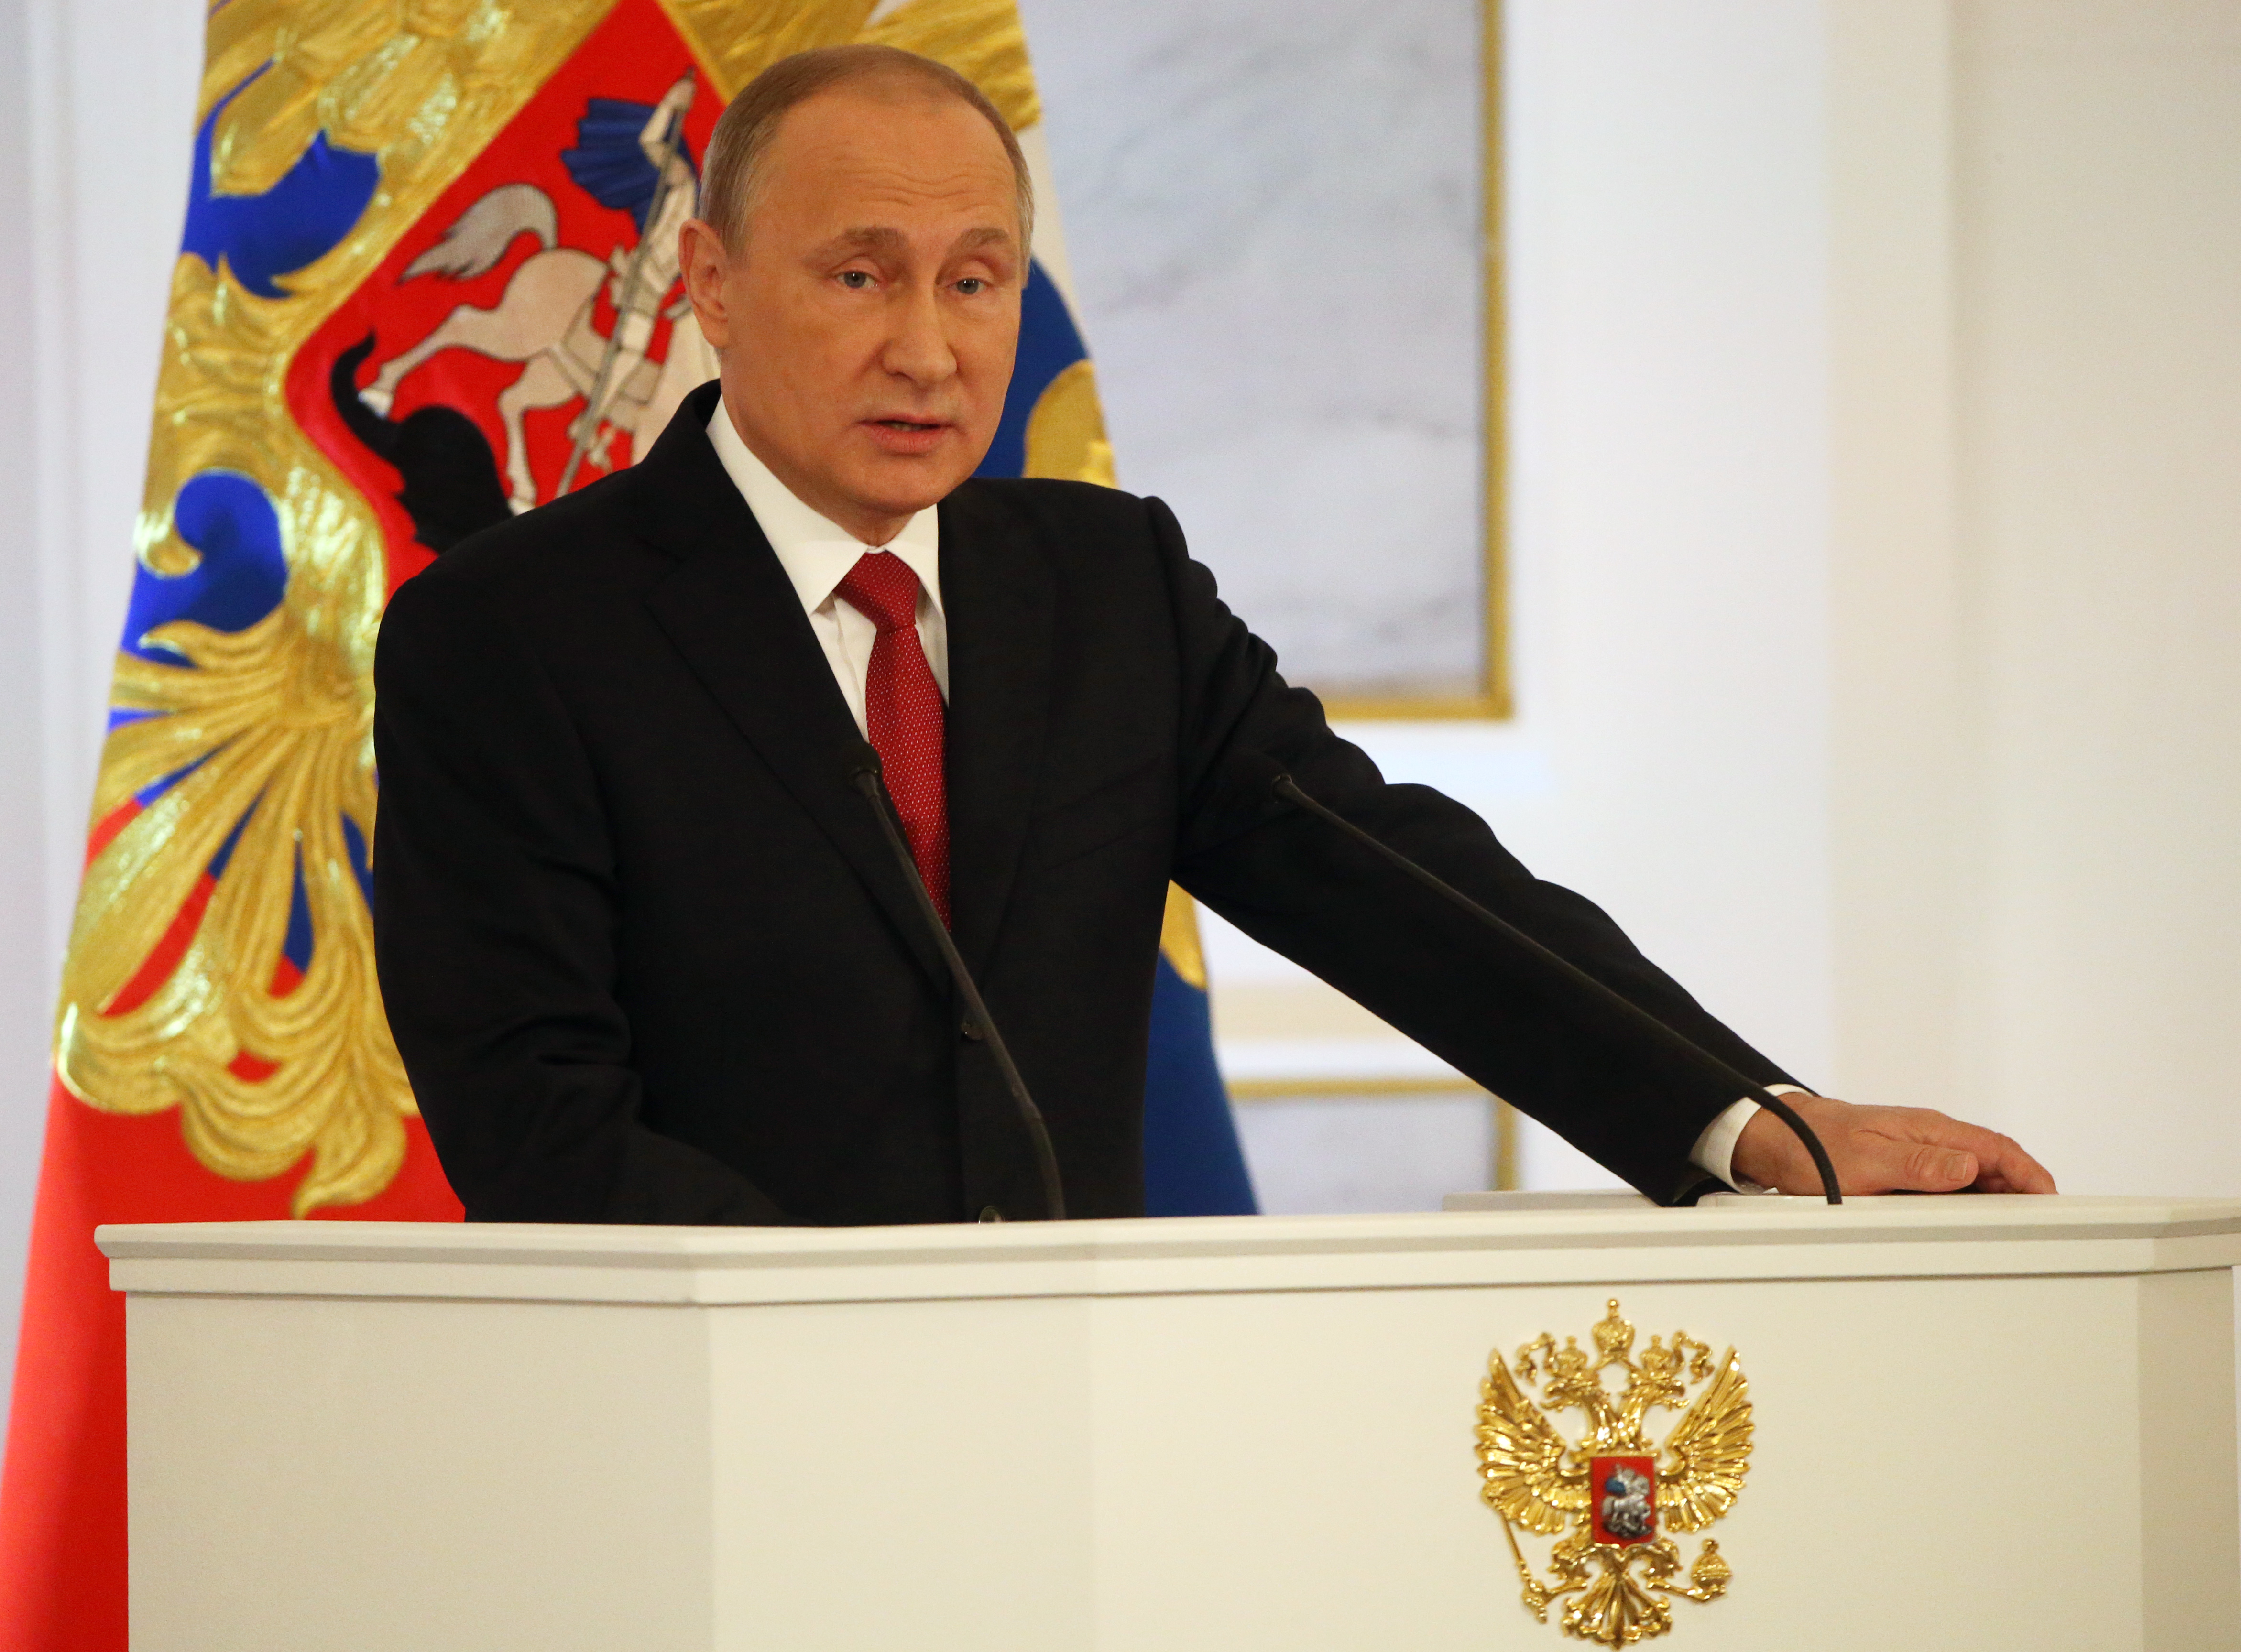 Russian President Vladimir Putin delivers his annual speech to the Federal Assembly at Grand Kremlin Palace on Dec. 1 in Moscow, Russia. (Mikhail Svetlov—Getty Images)